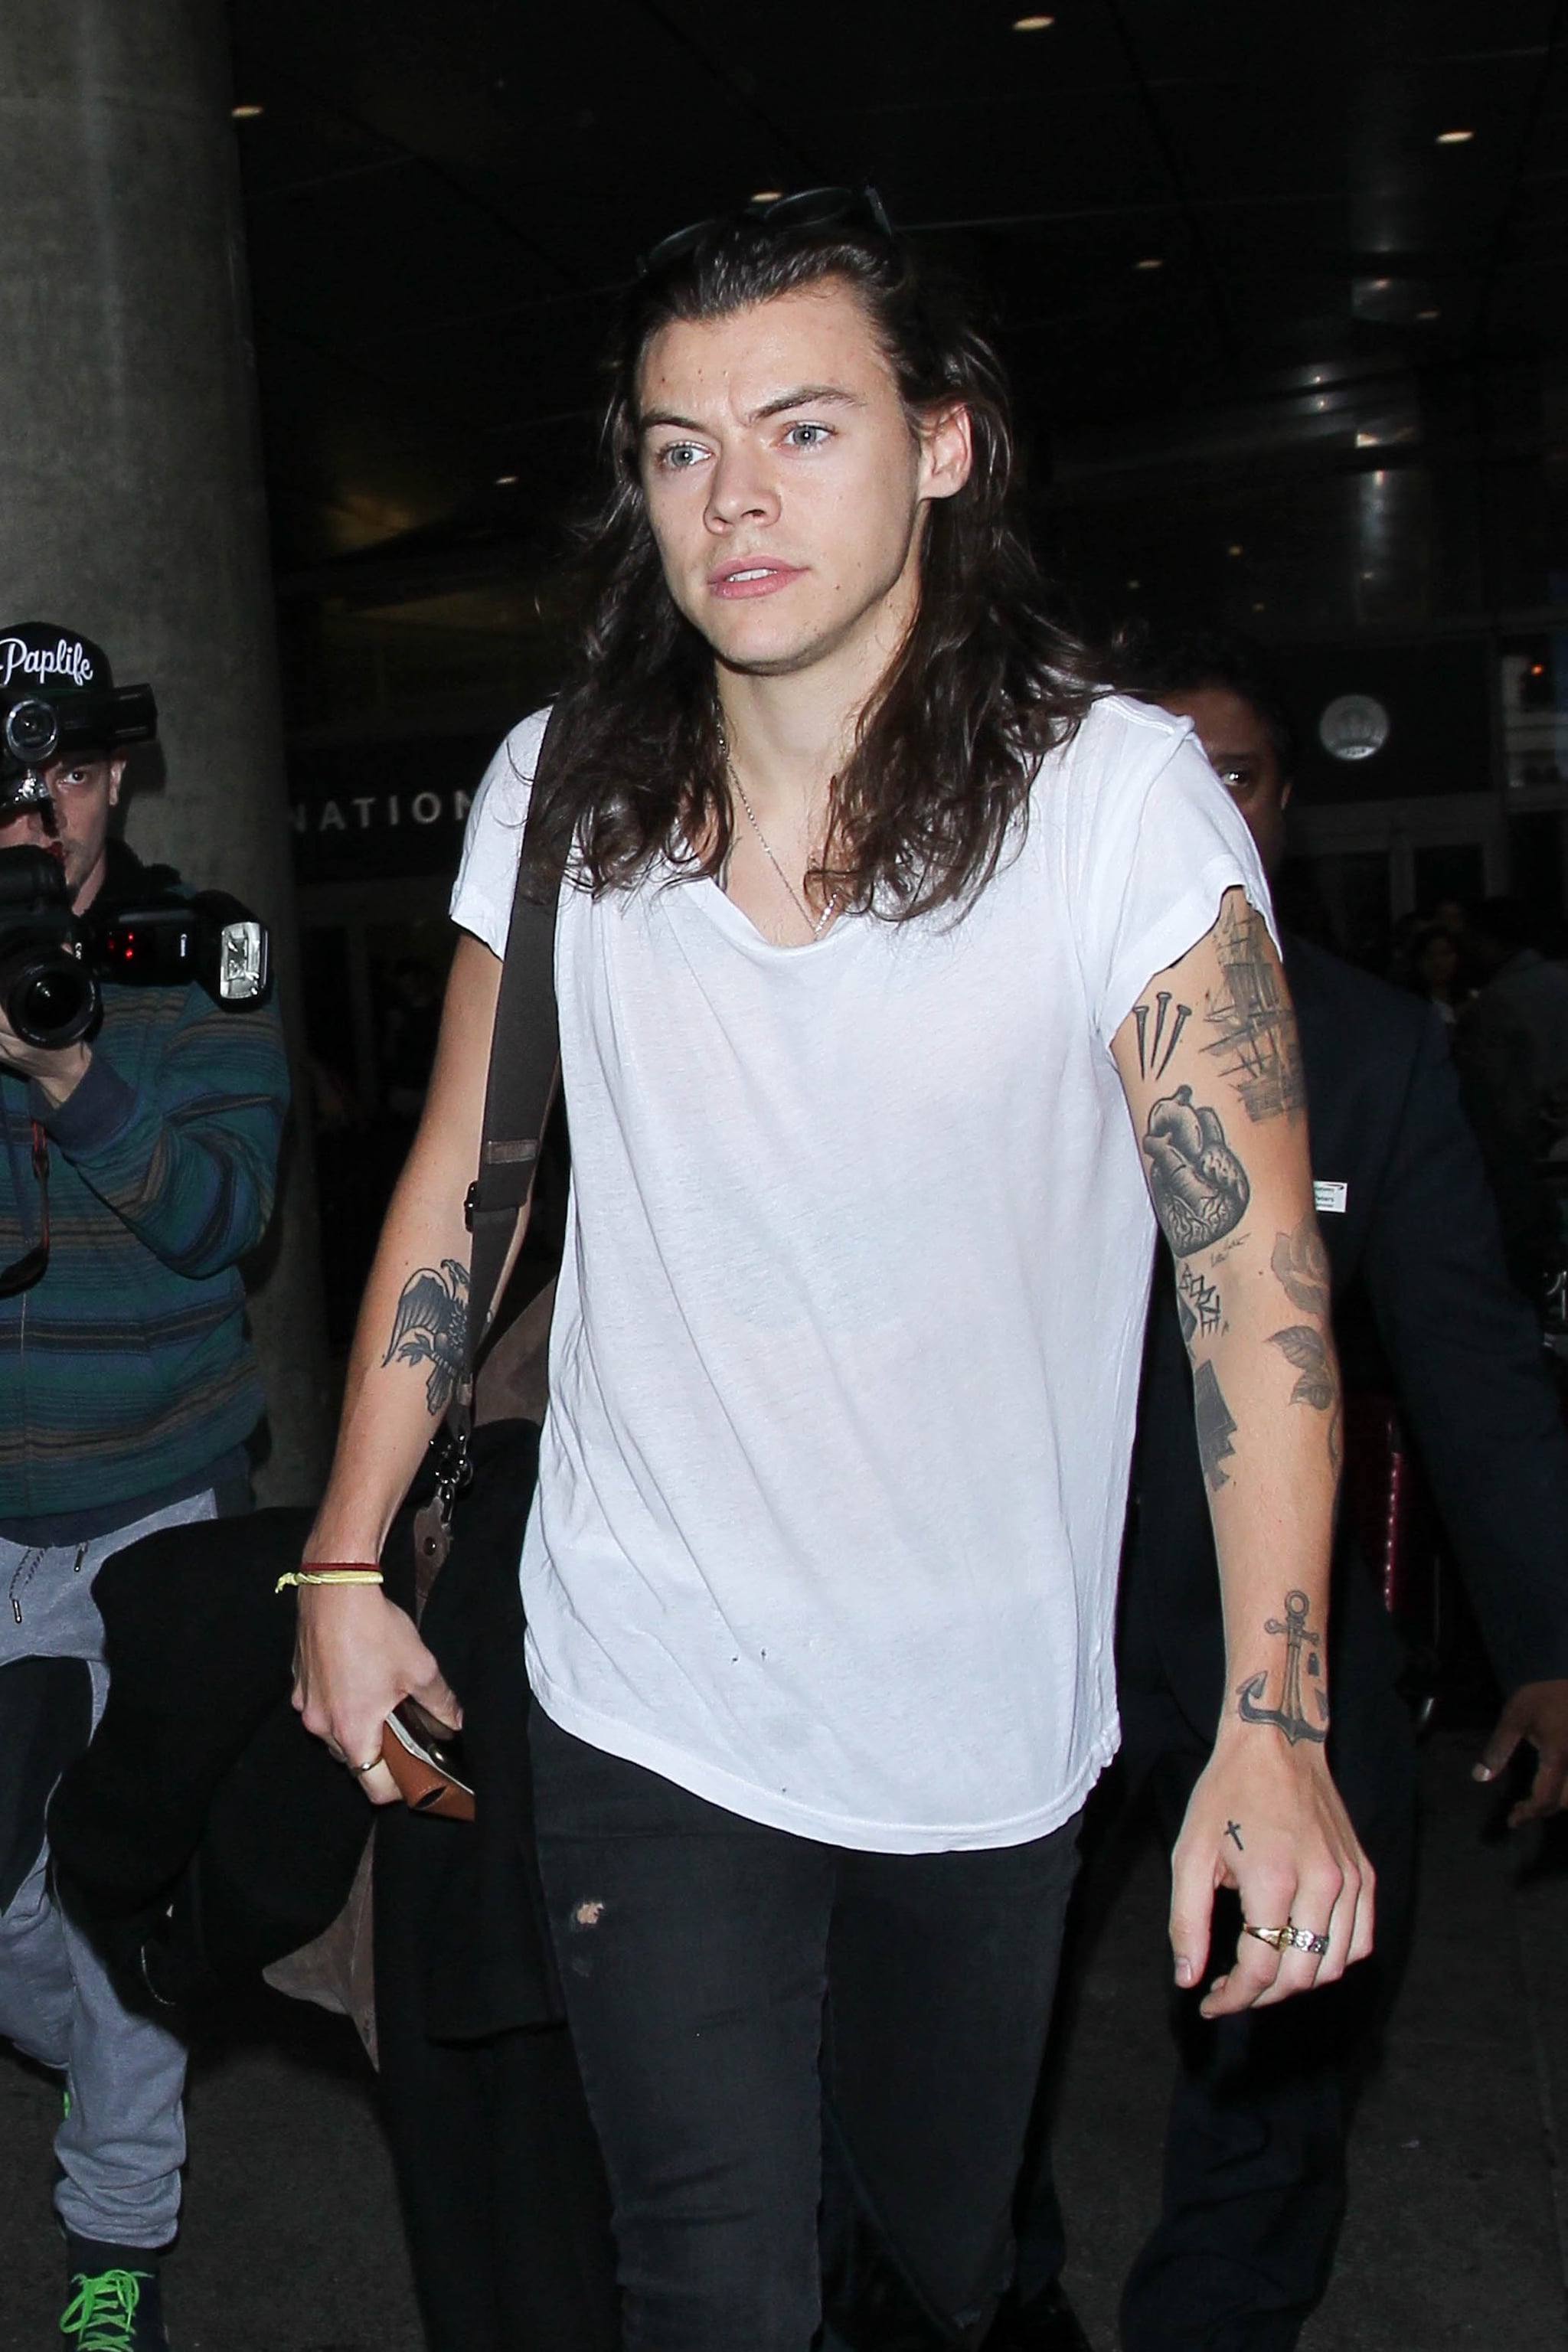 Harry Styles Late Late Tattoo  Spiritustattoocom  Harry styles tattoos  Latest tattoos Tattoos